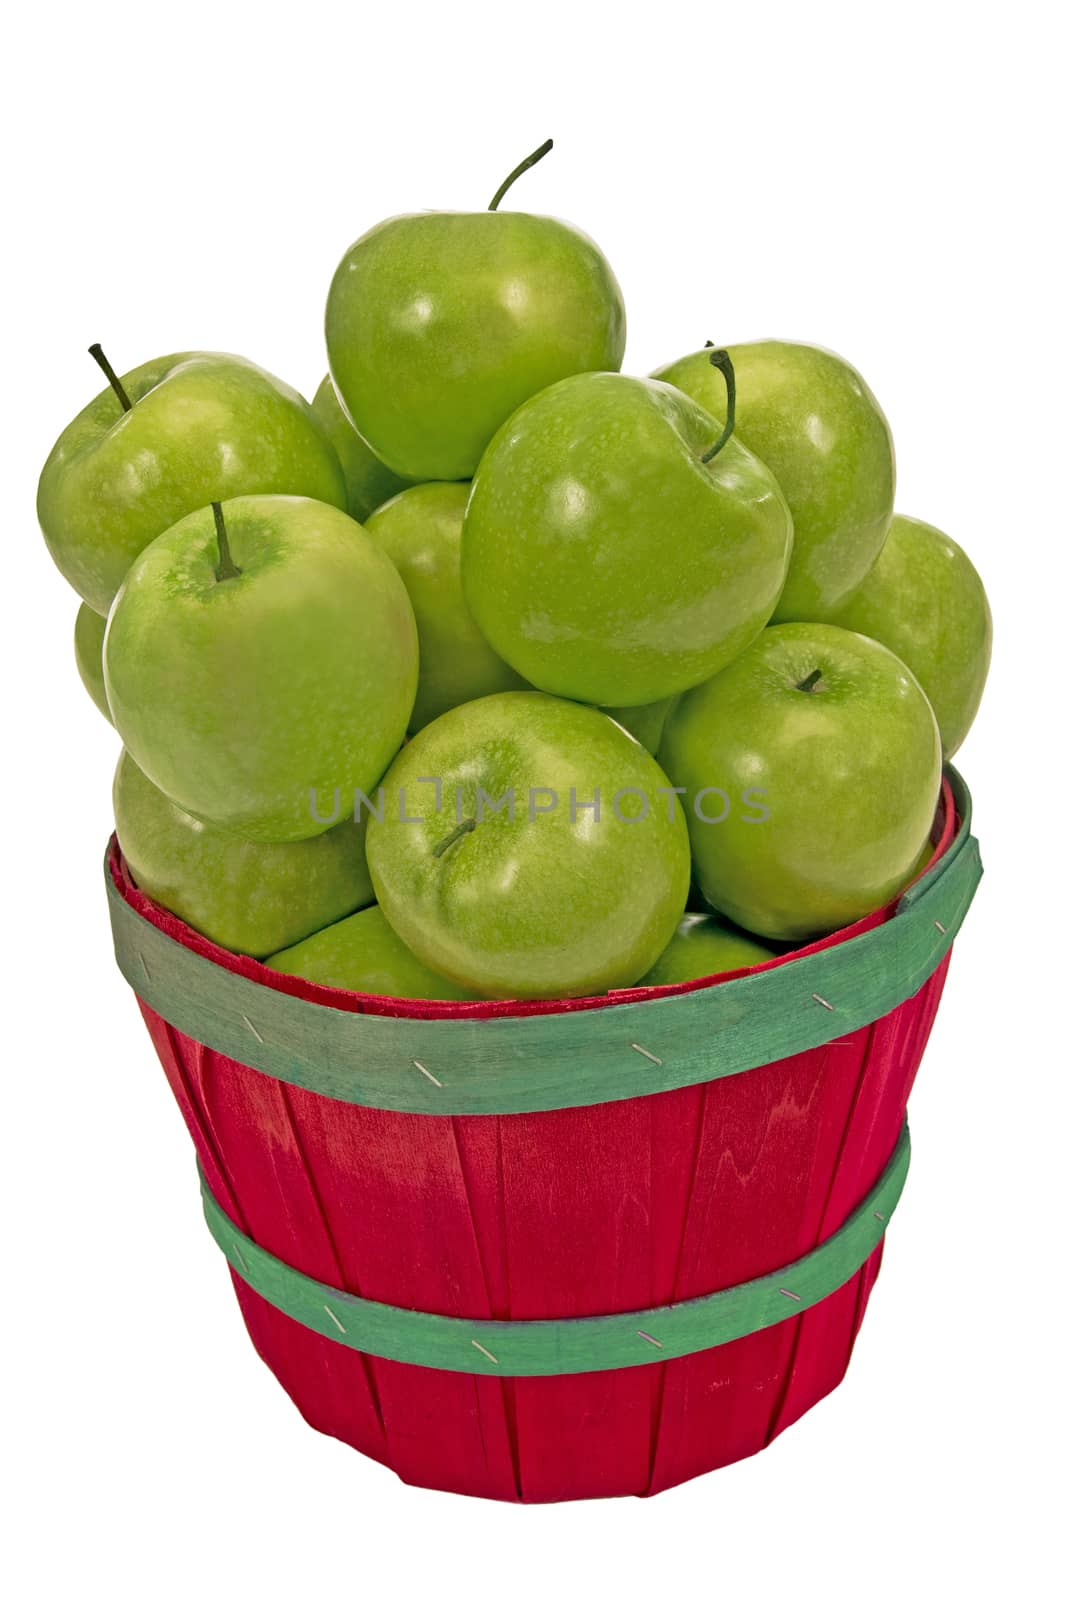 Close up shot of a small basket overloaded with fresh picked green apples on a white background.